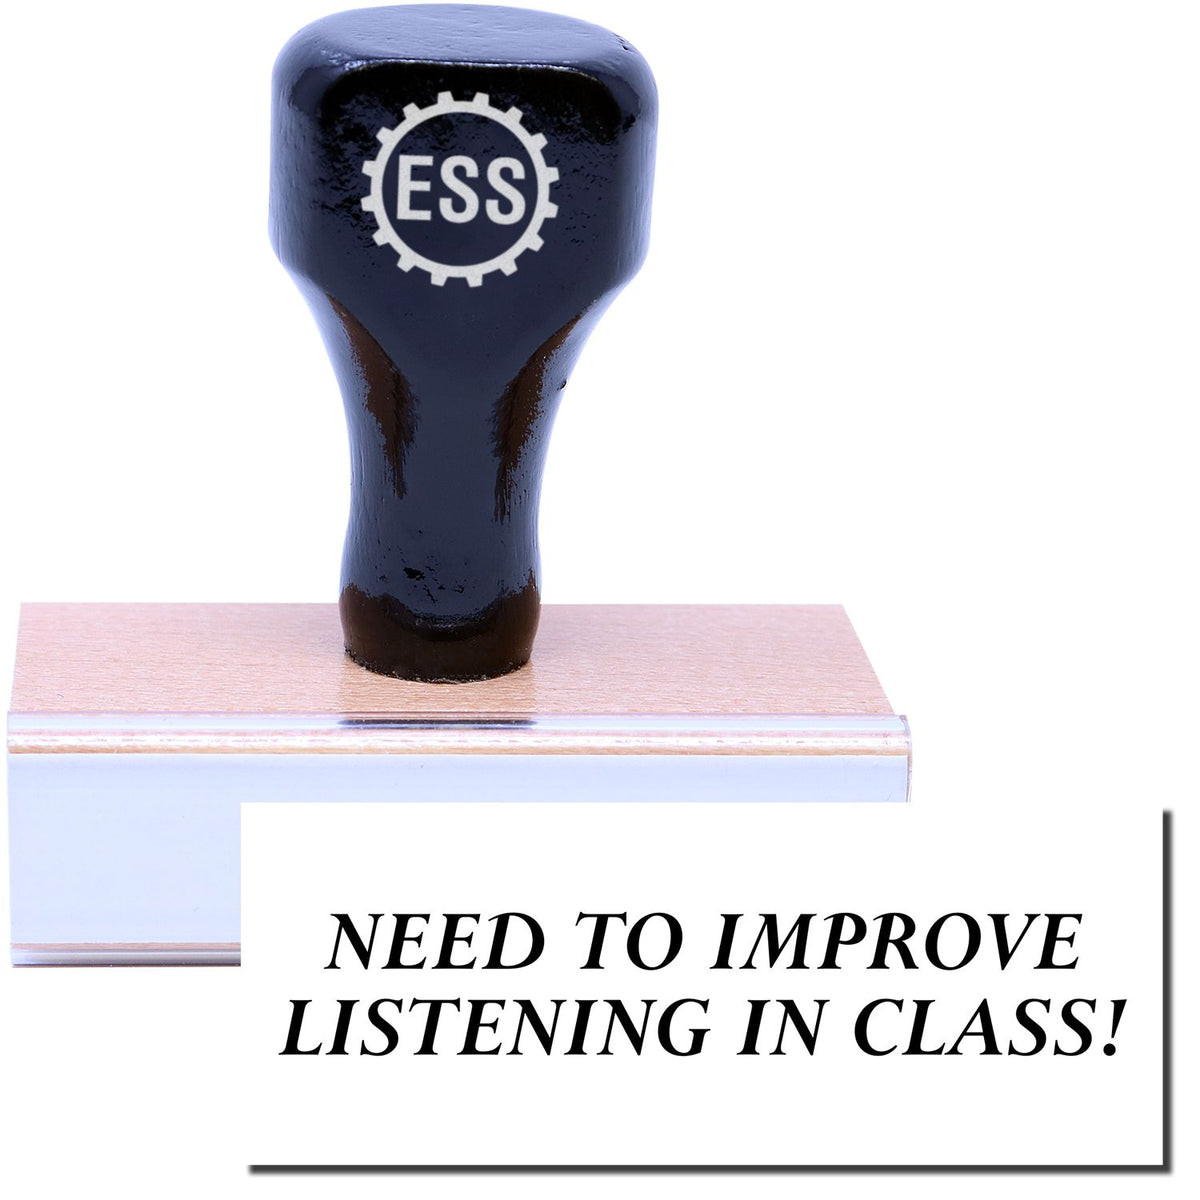 A stock office rubber stamp with a stamped image showing how the text &quot;NEED TO IMPROVE LISTENING IN CLASS!&quot; in a large font is displayed after stamping.